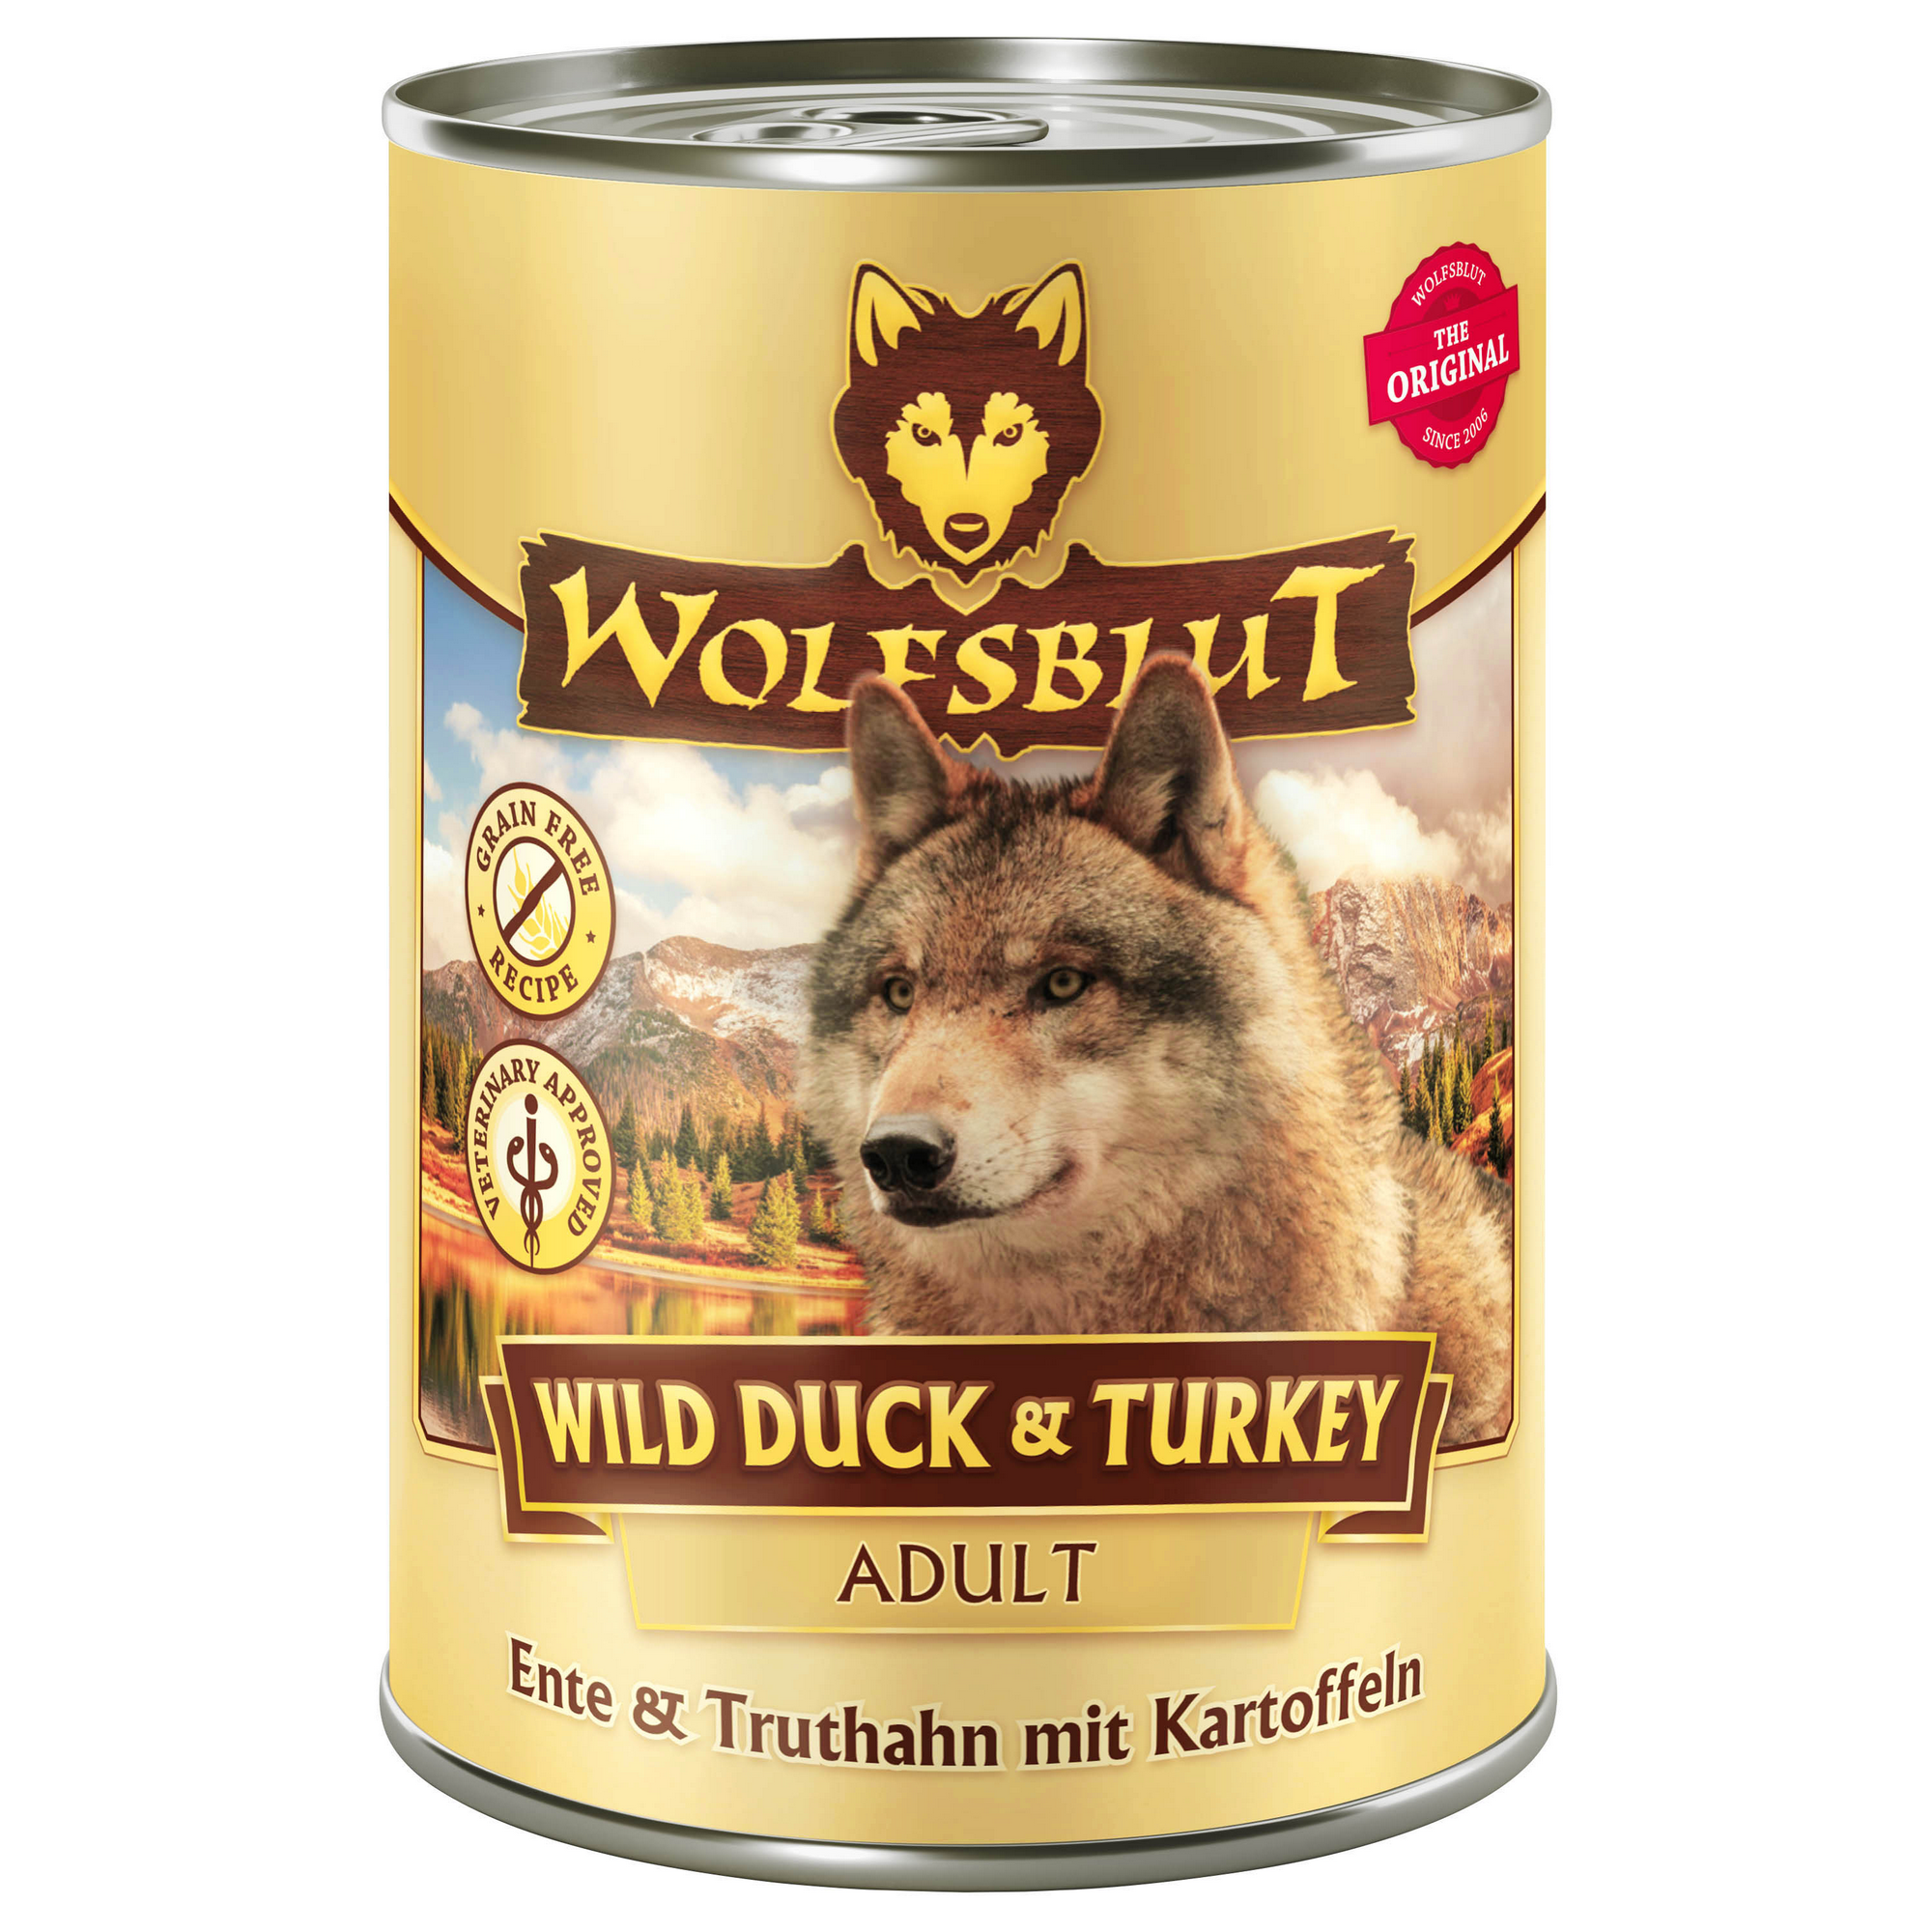 Hundenassfutter 'Wild Duck & Turkey' Adult 395 g + product picture